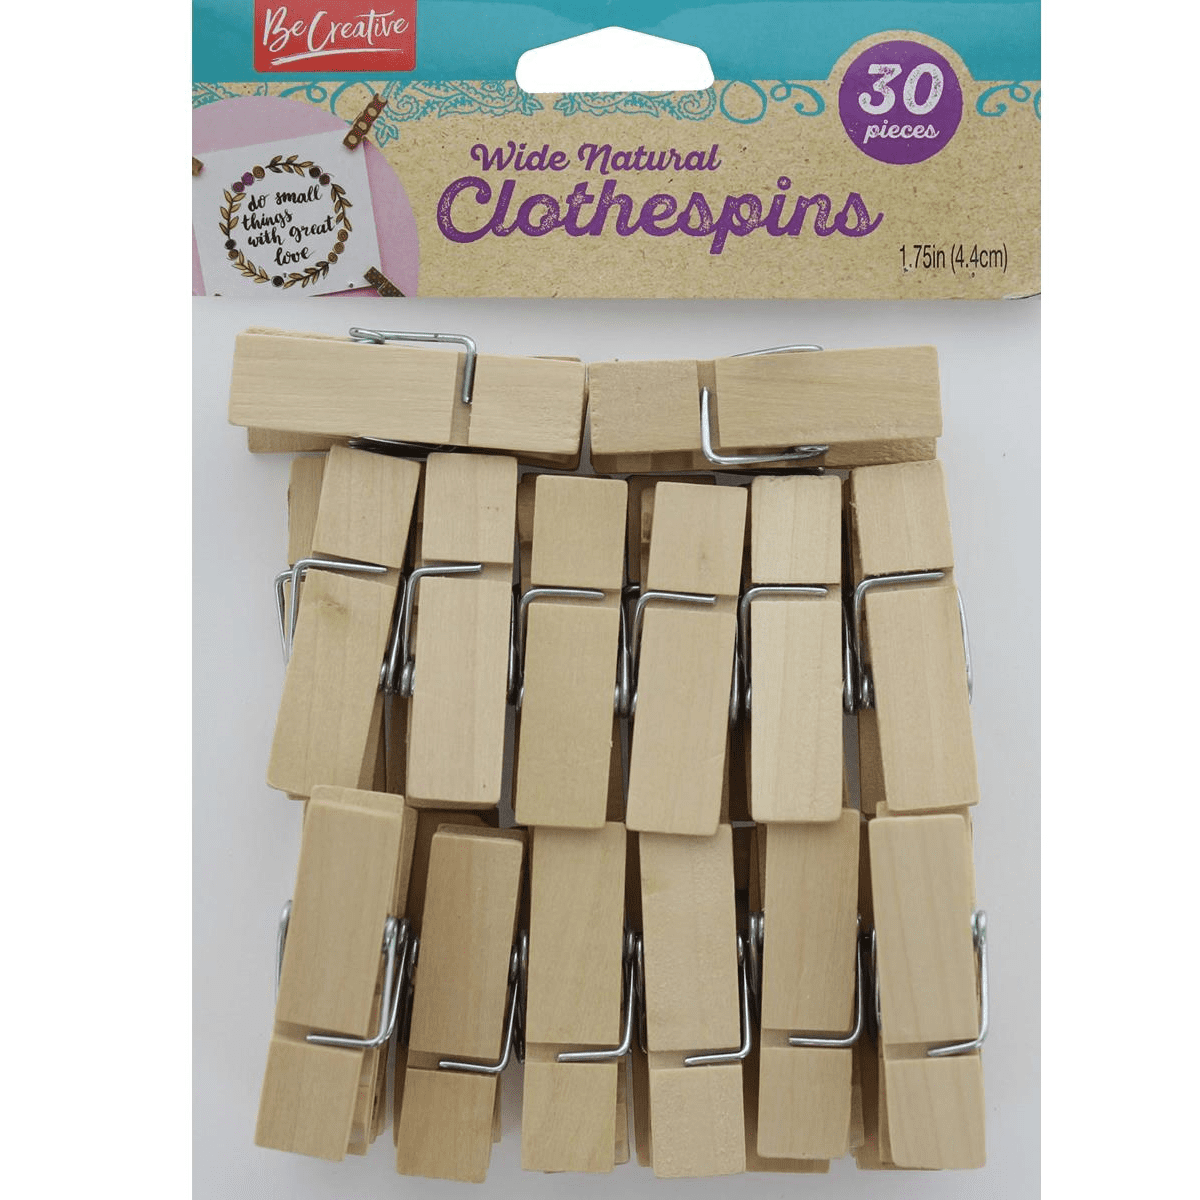 Jam Paper Wood Clothespins, Assorted Colors, Large 1 1/2 inch, 24/Pack, Size: 1.5